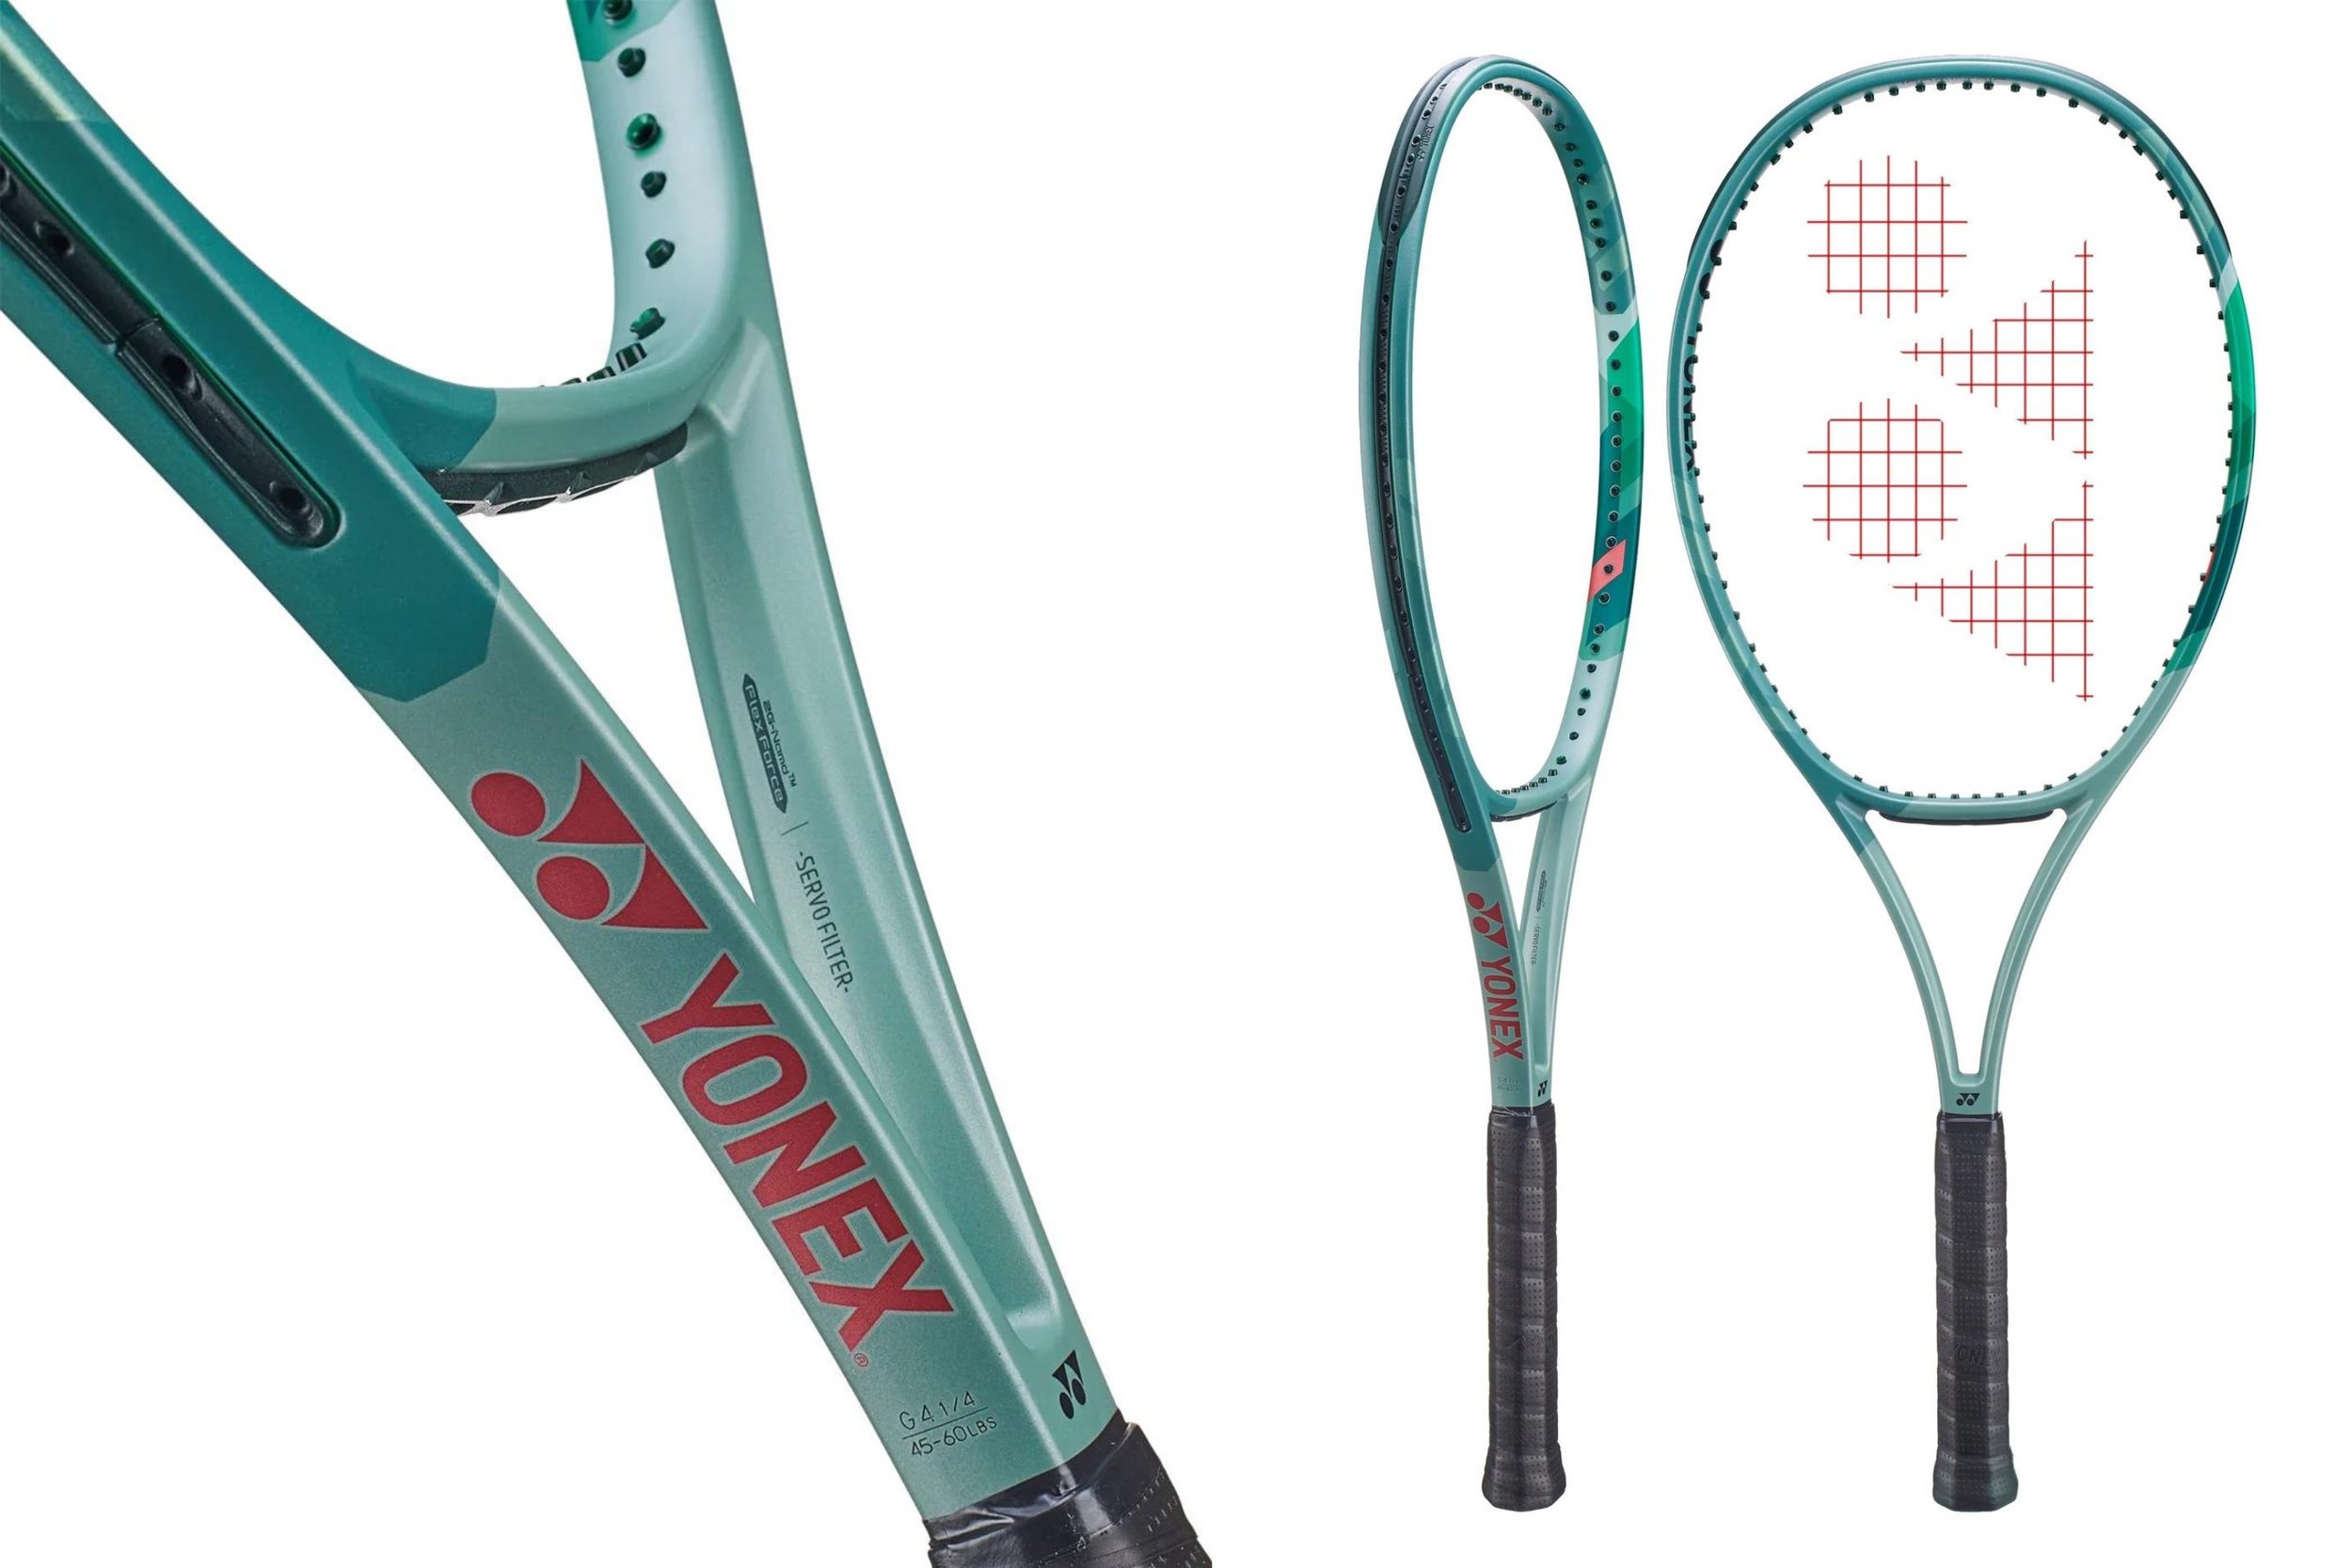 Yonex Percept 100 Tennis Racket Review The Best I Have Played With — Tennis Lessons Singapore Tennis Coach Singapore Play! Tennis